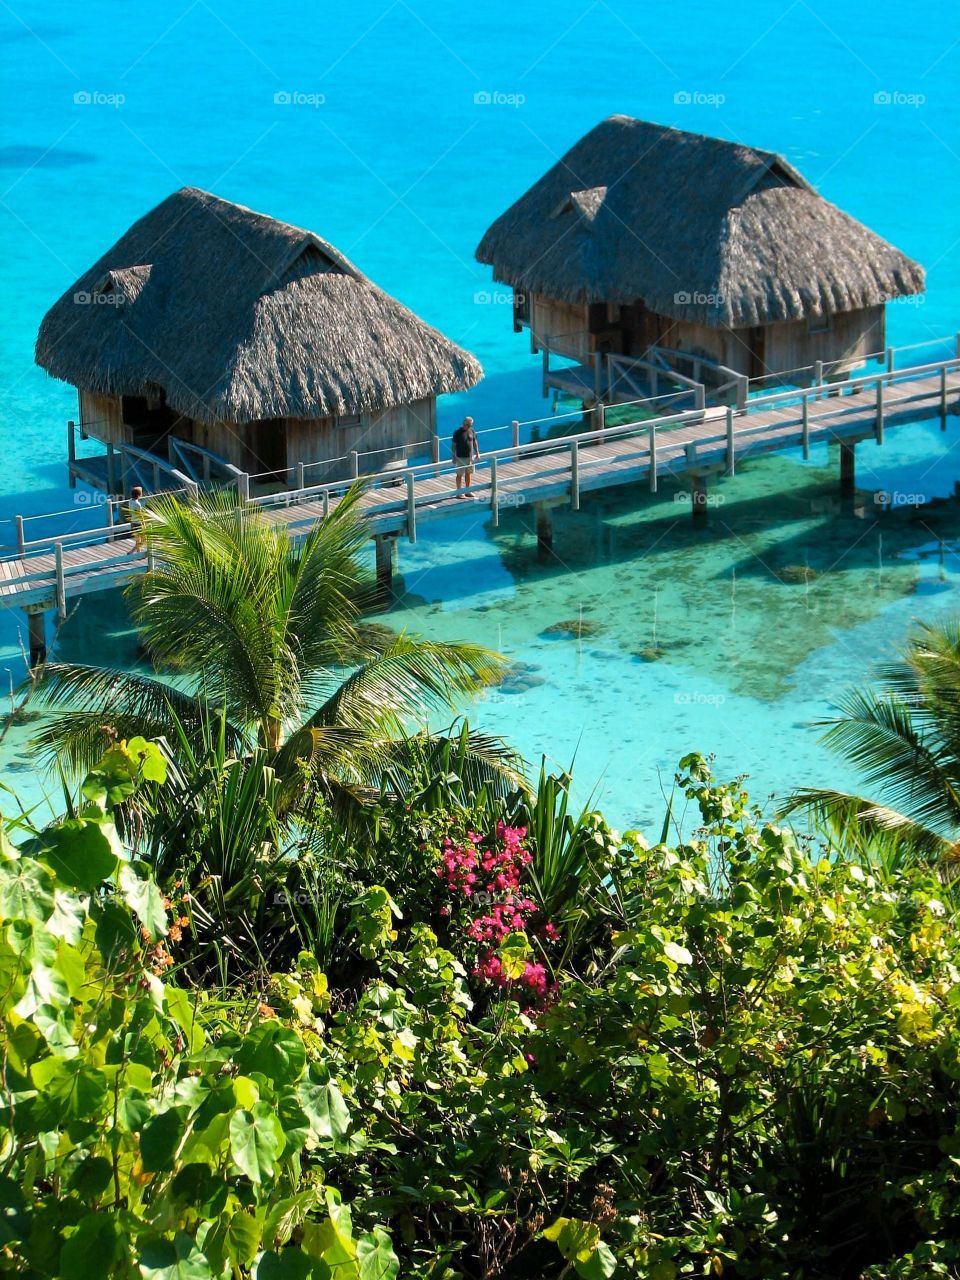 Overwater bungalows. Overwater bungalows in Bora Bora at the Sofitel Private Island, French Polynesia